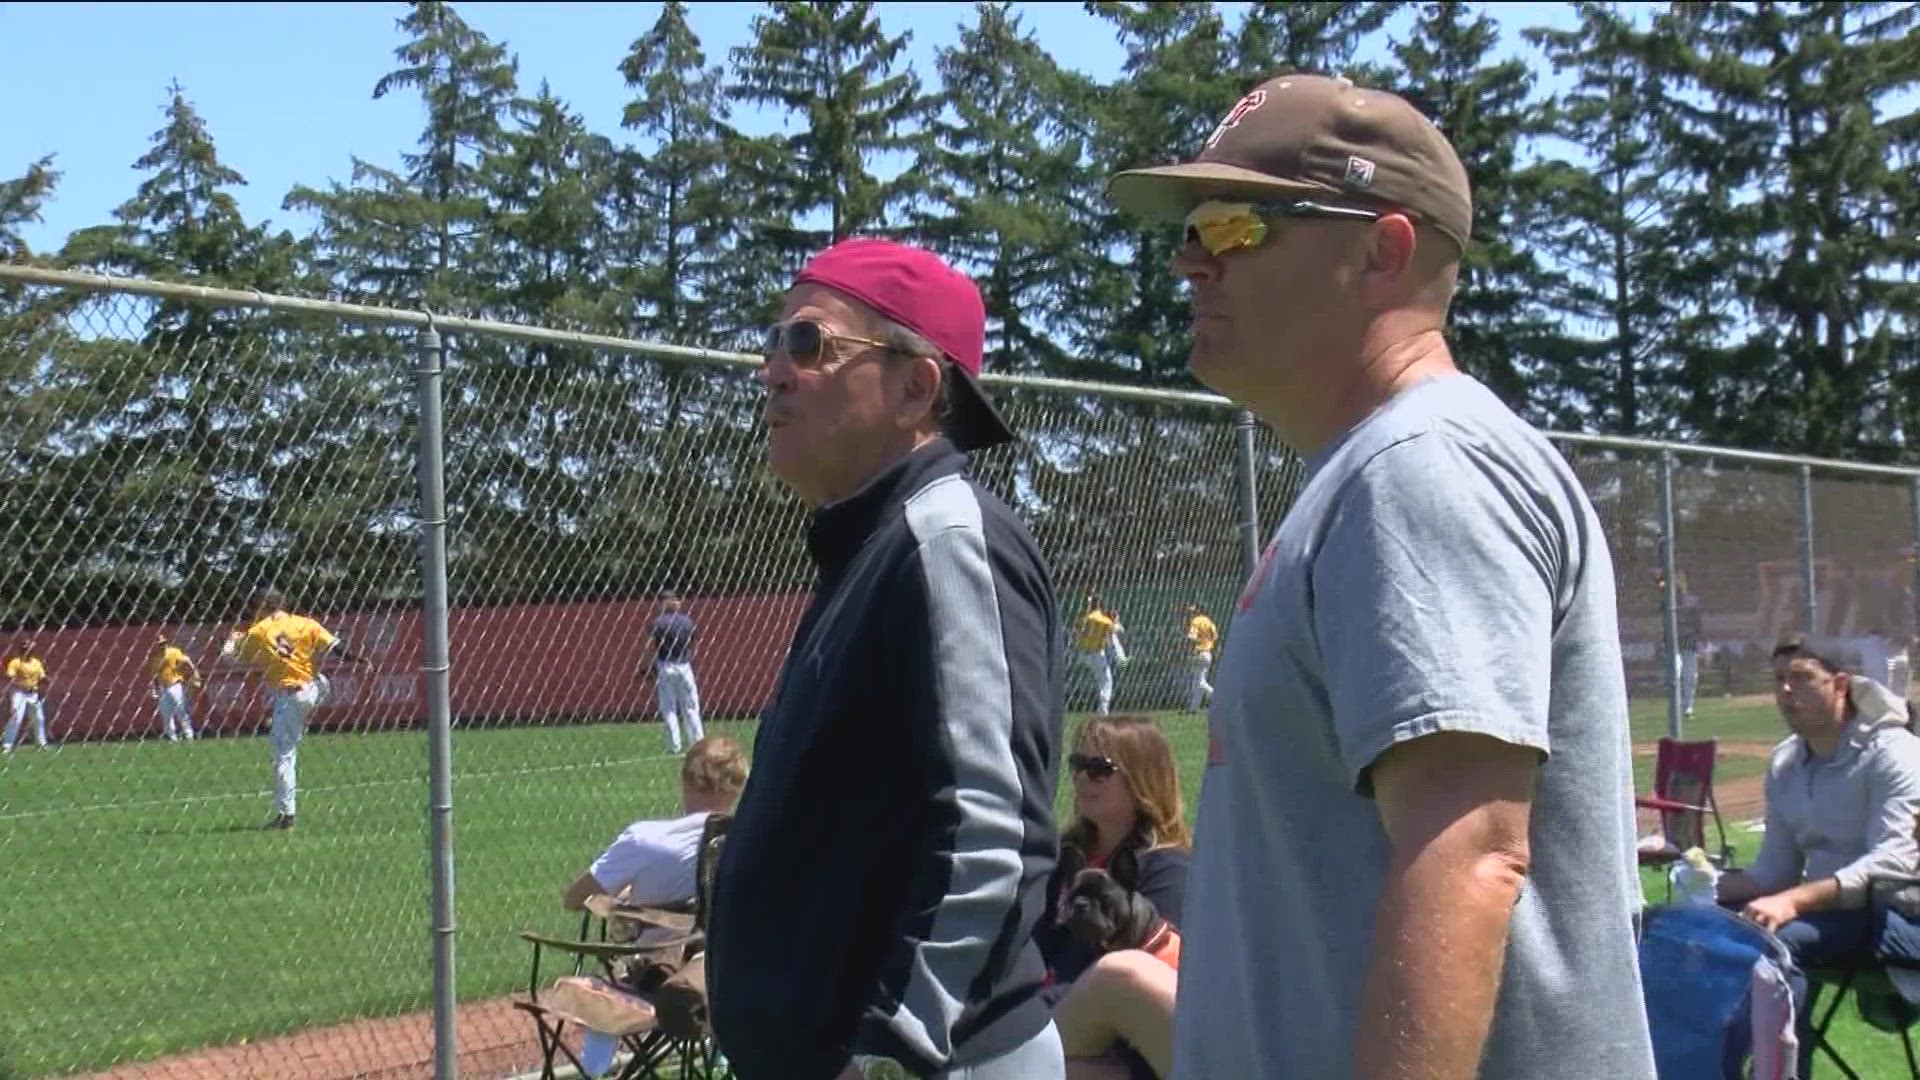 Three generations of MAC baseball have brought the Haas family closer together